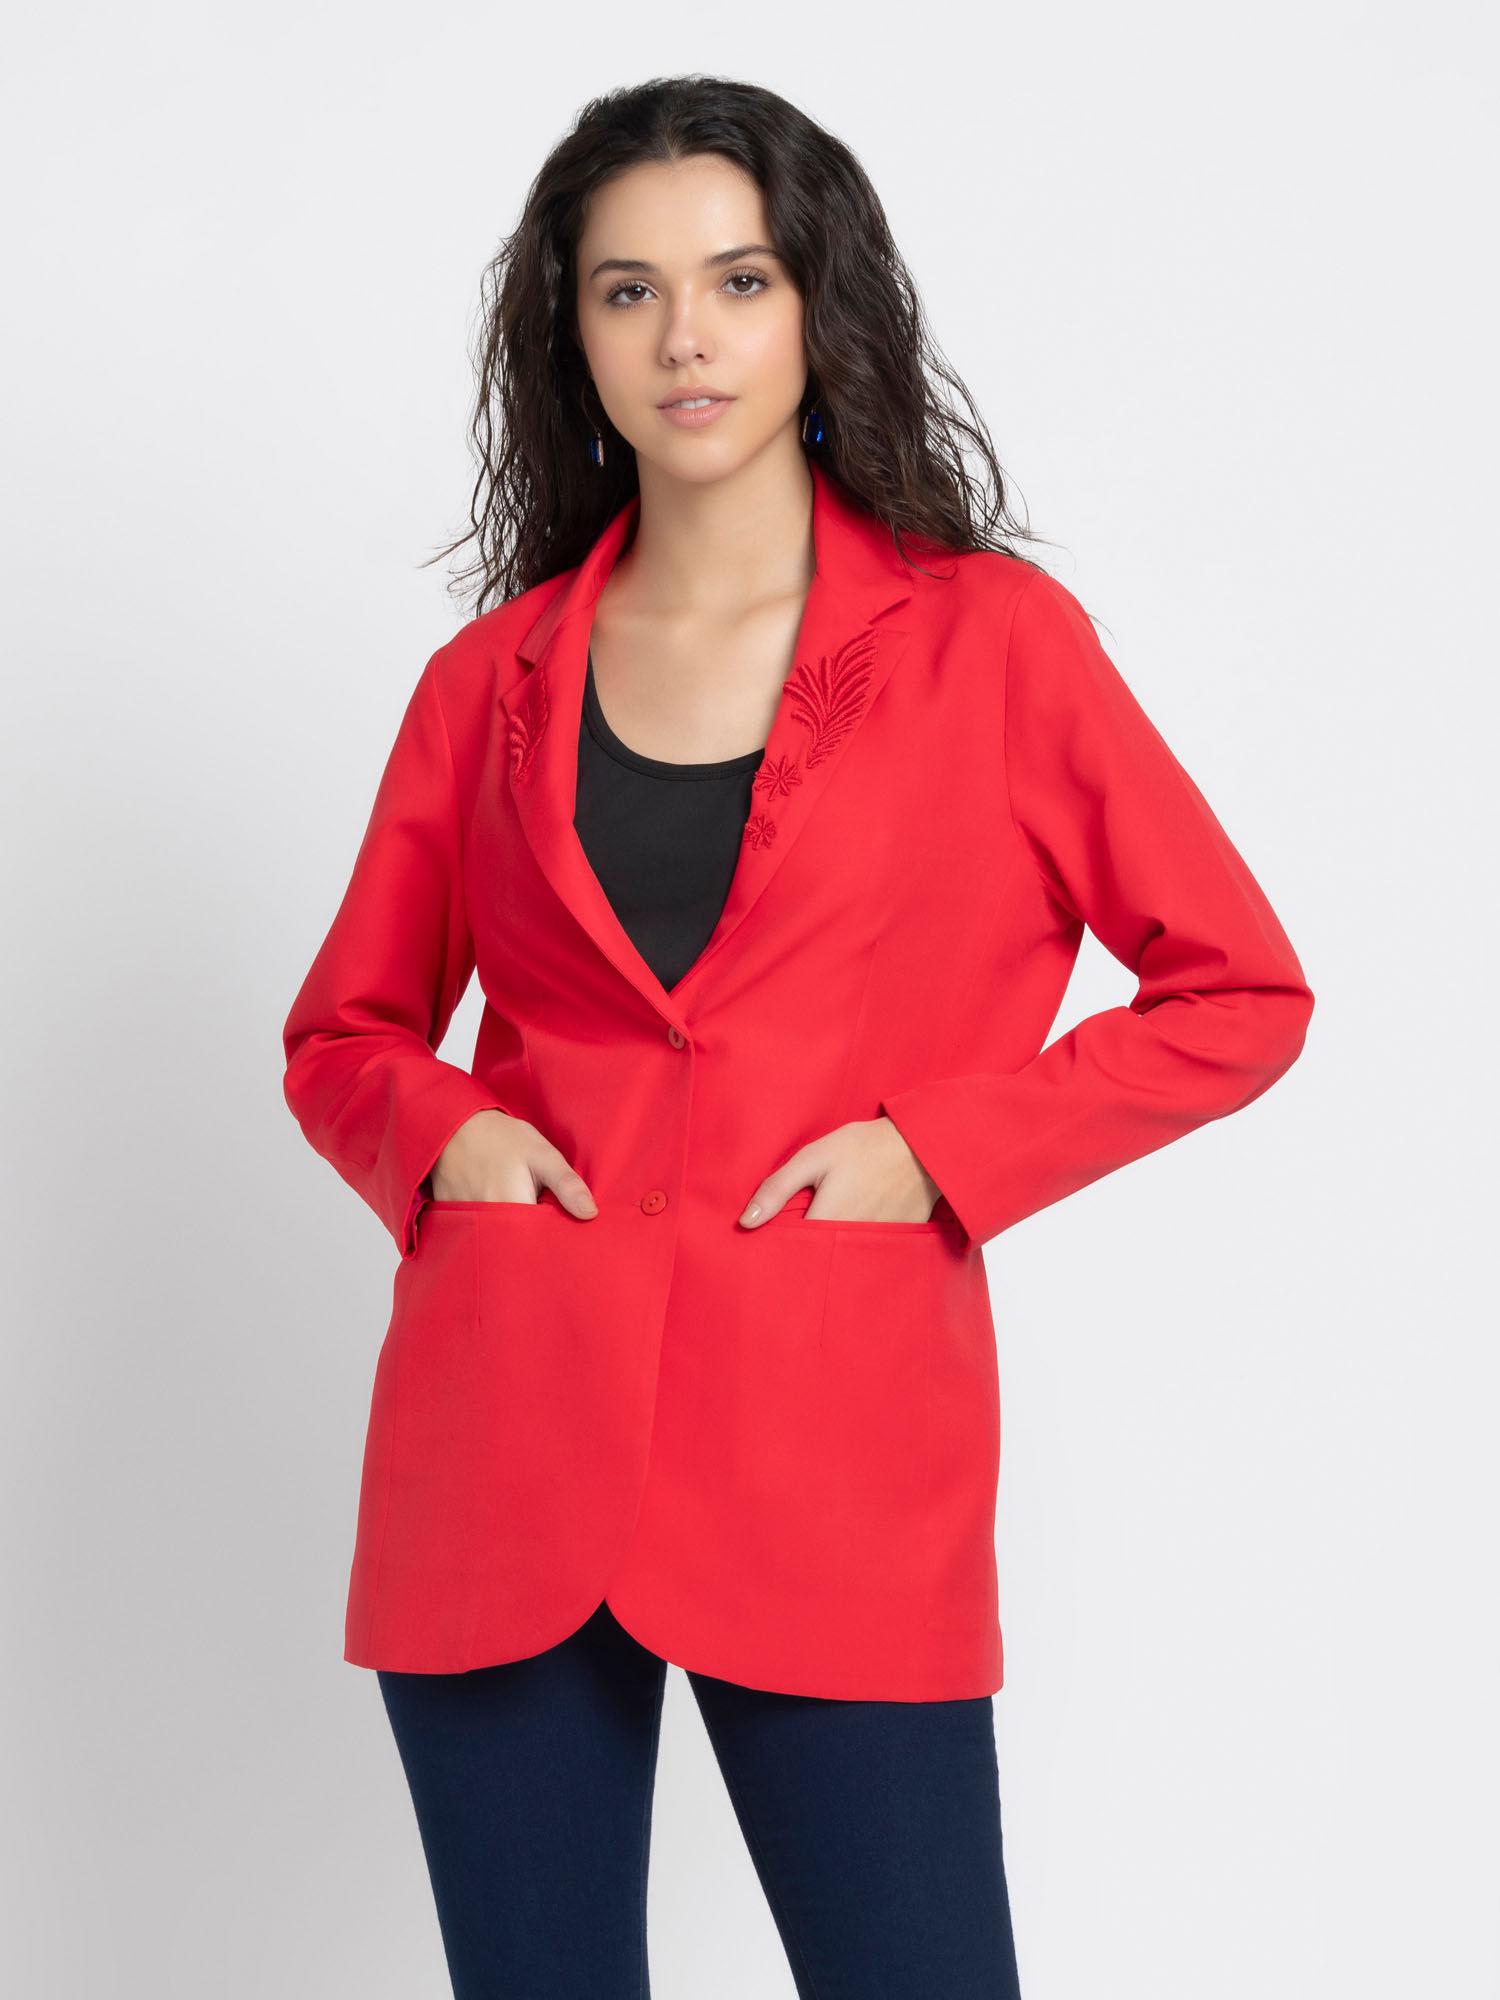 Women Notched Lapel Red Embroidered Full Sleeves Party Blazer